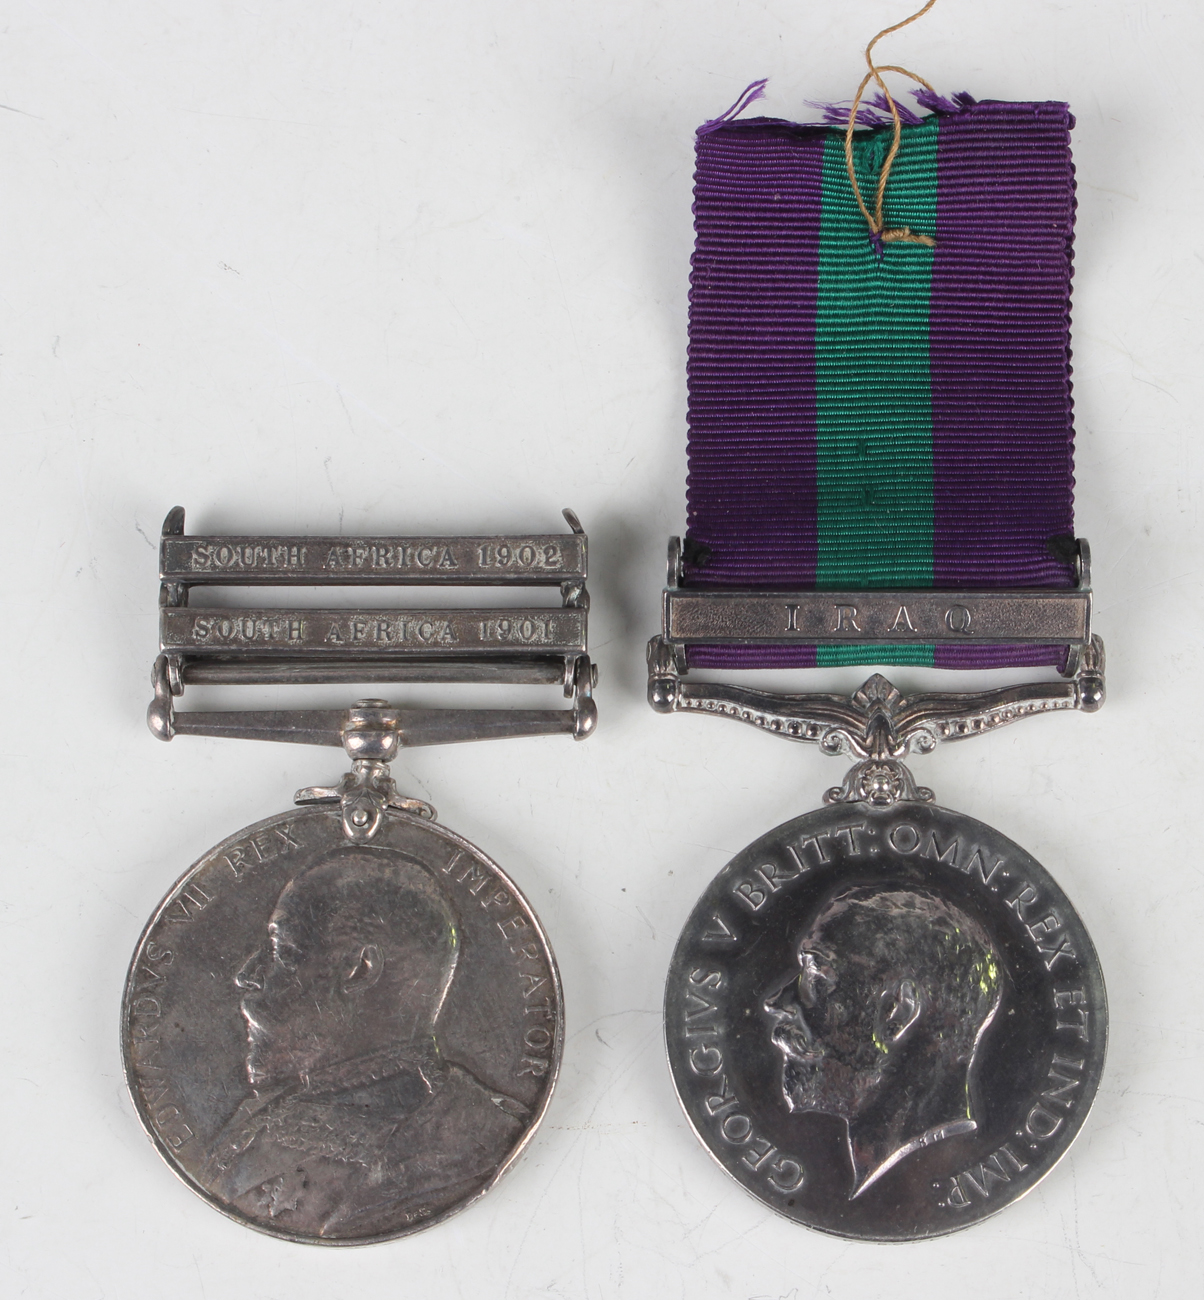 A King's South Africa Medal with two bars, 'South Africa 1901' and 'South Africa 1902', to '5461